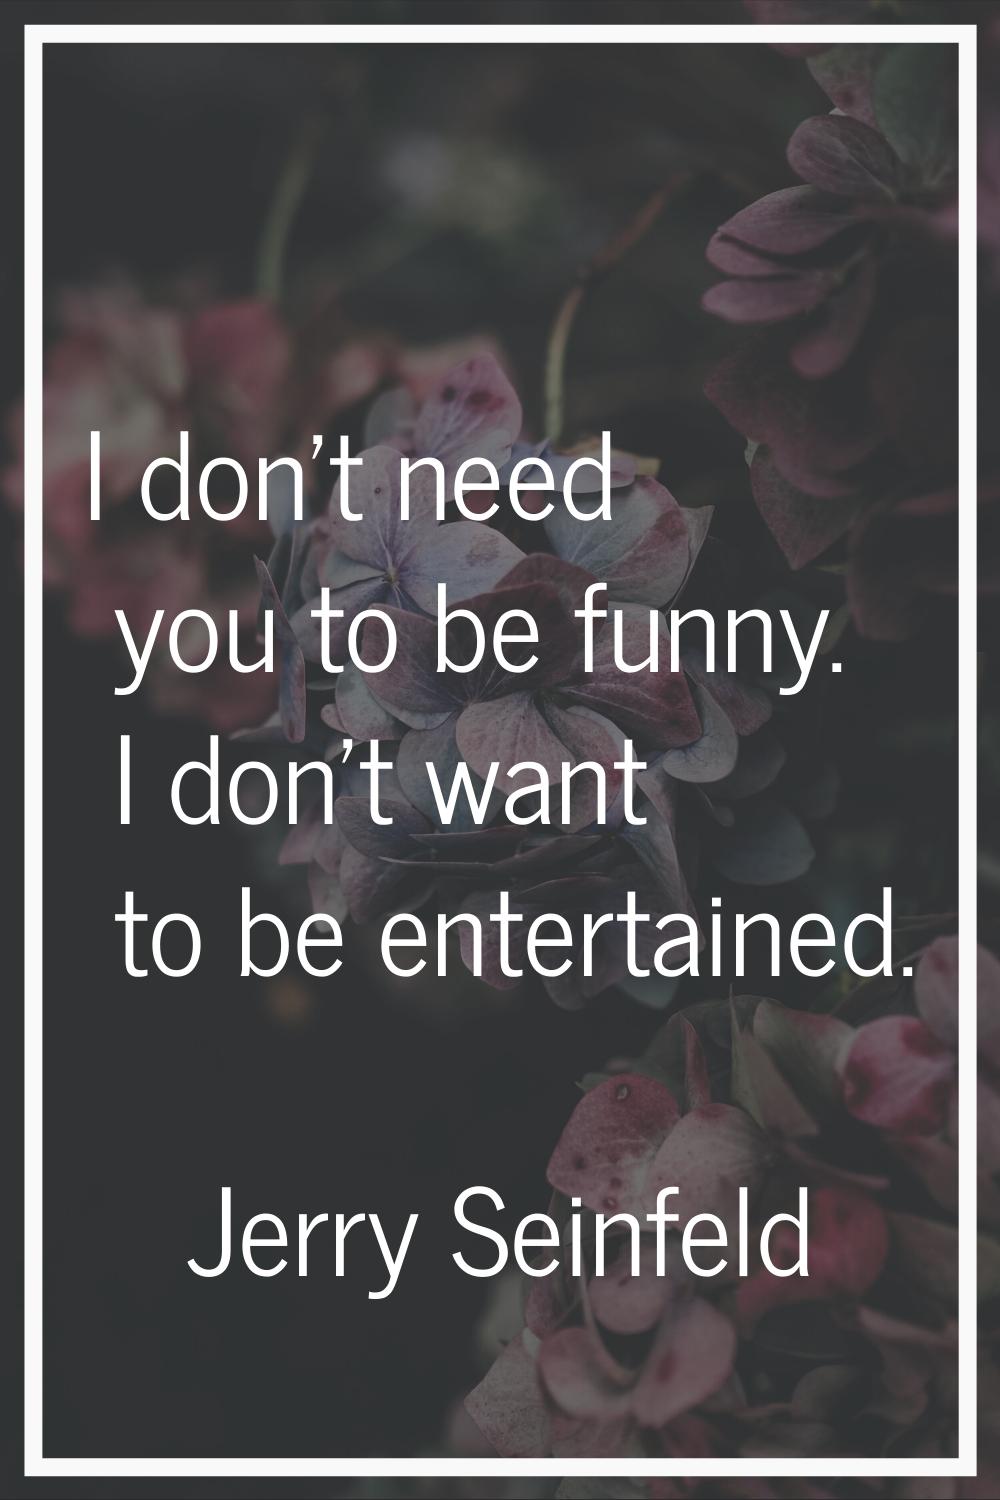 I don't need you to be funny. I don't want to be entertained.